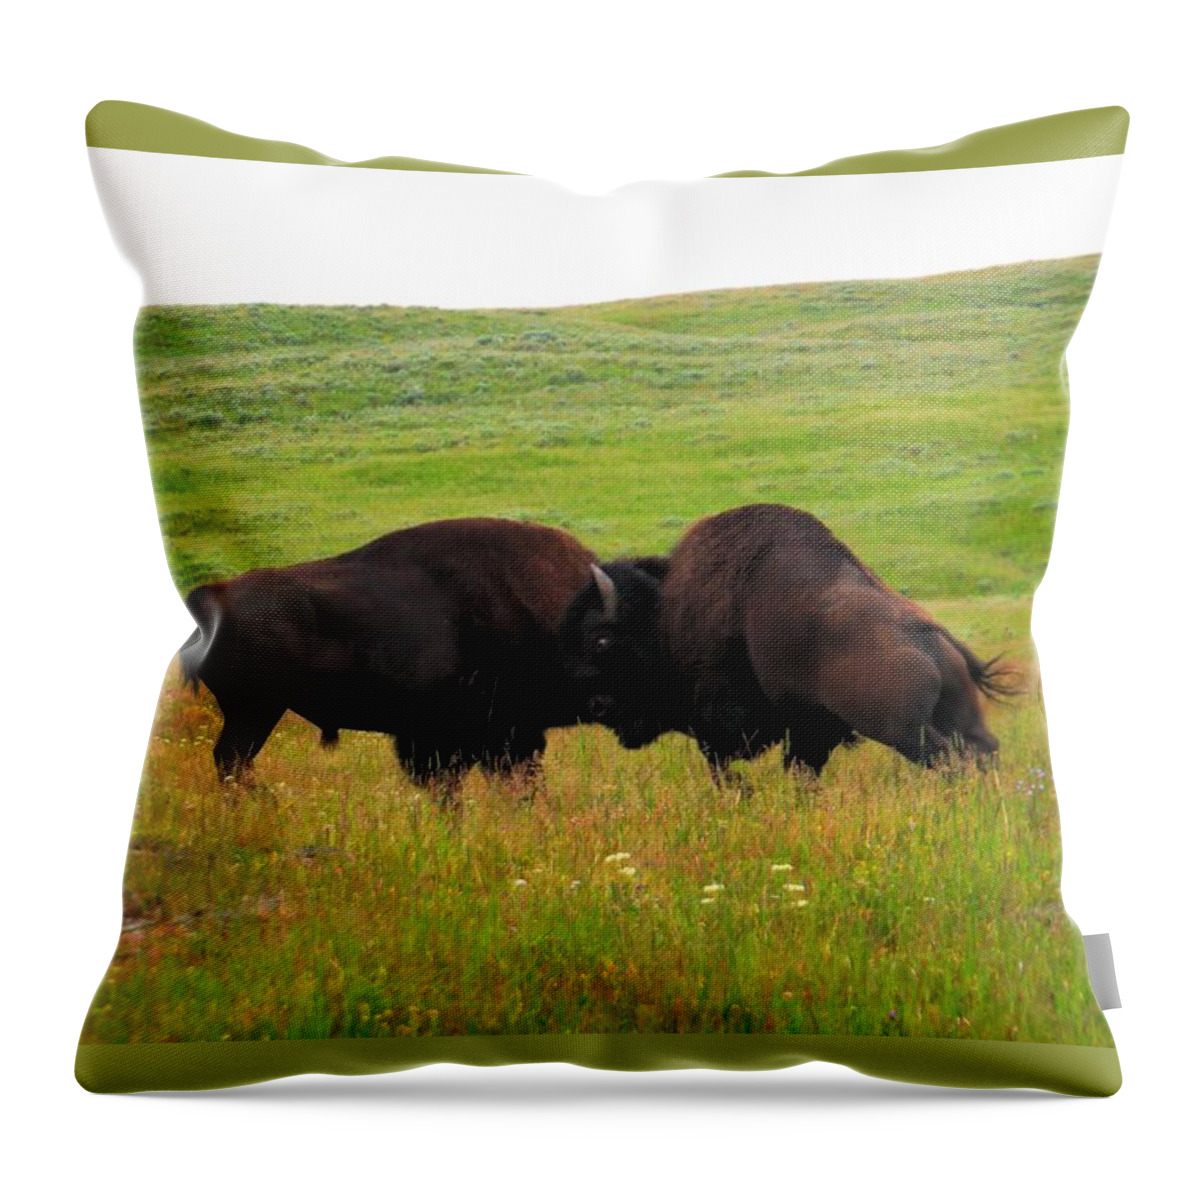 Buffalo Throw Pillow featuring the photograph A Bison Brawl by Jeff Swan